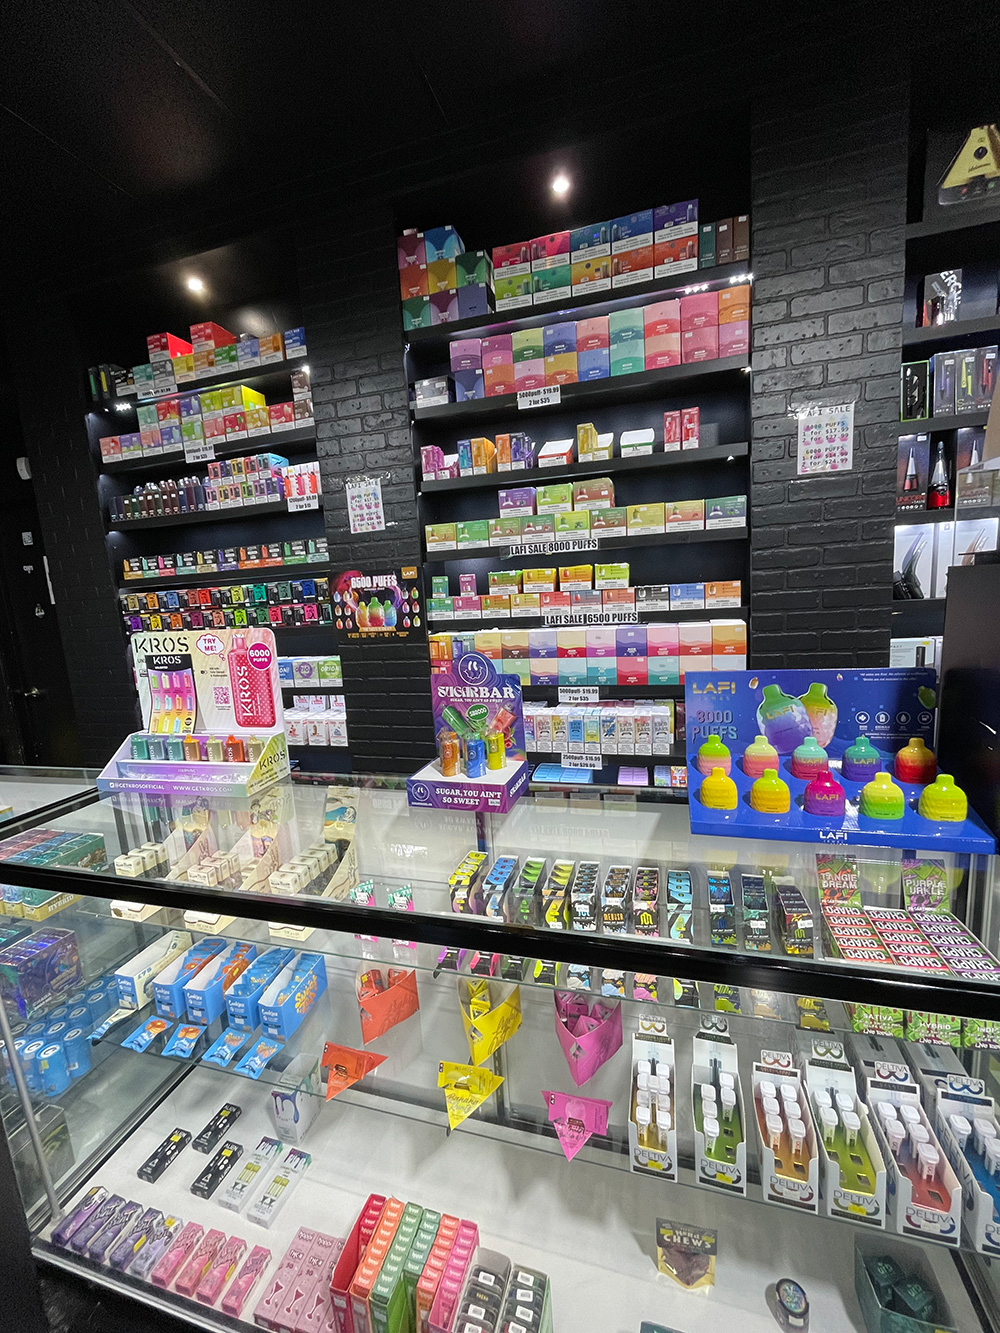 20 Vape shops Jobs in Houston, TX, July Search Vape shops jobs in Houston, TX with company ratings & salaries. 20 open jobs for Vape shops in Houston. Smokenjoy is the Best Vape Shop In Houston Texas near 4922 Washington Ave. Come to enjoy diversified flavors of Smoke and Vape.